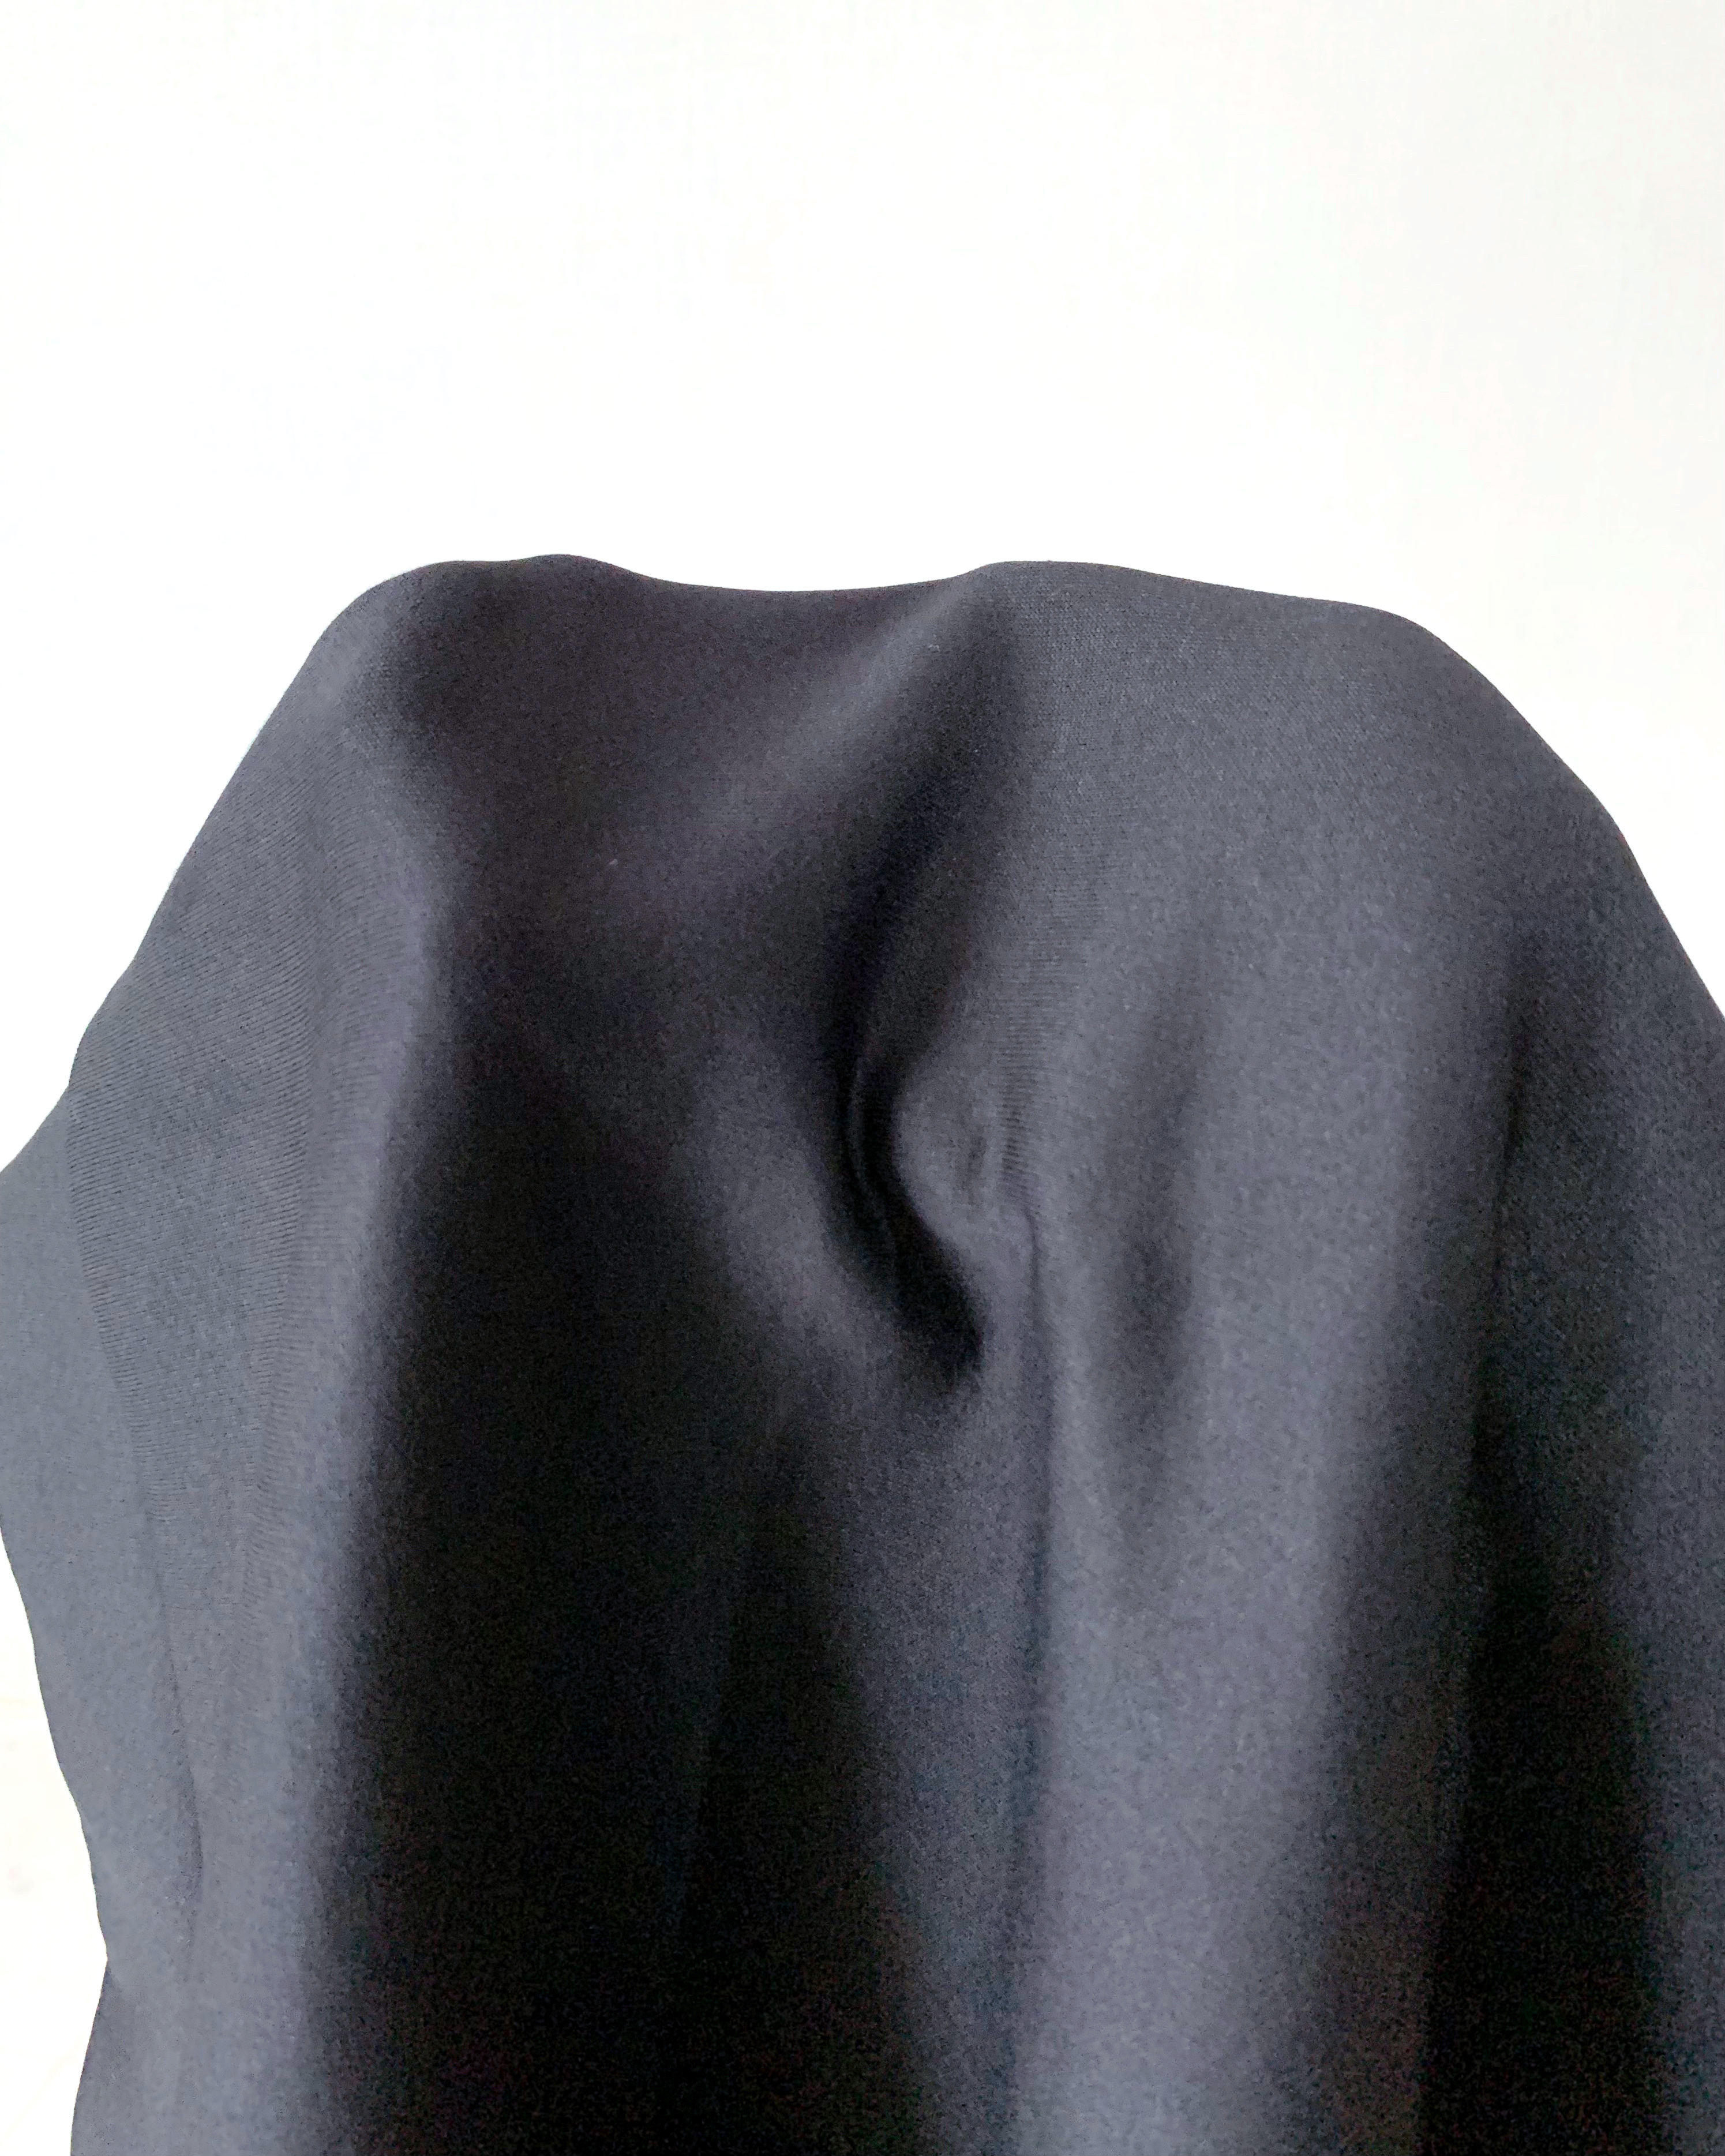 Person concealed under a plain fabric, obscuring identity and form